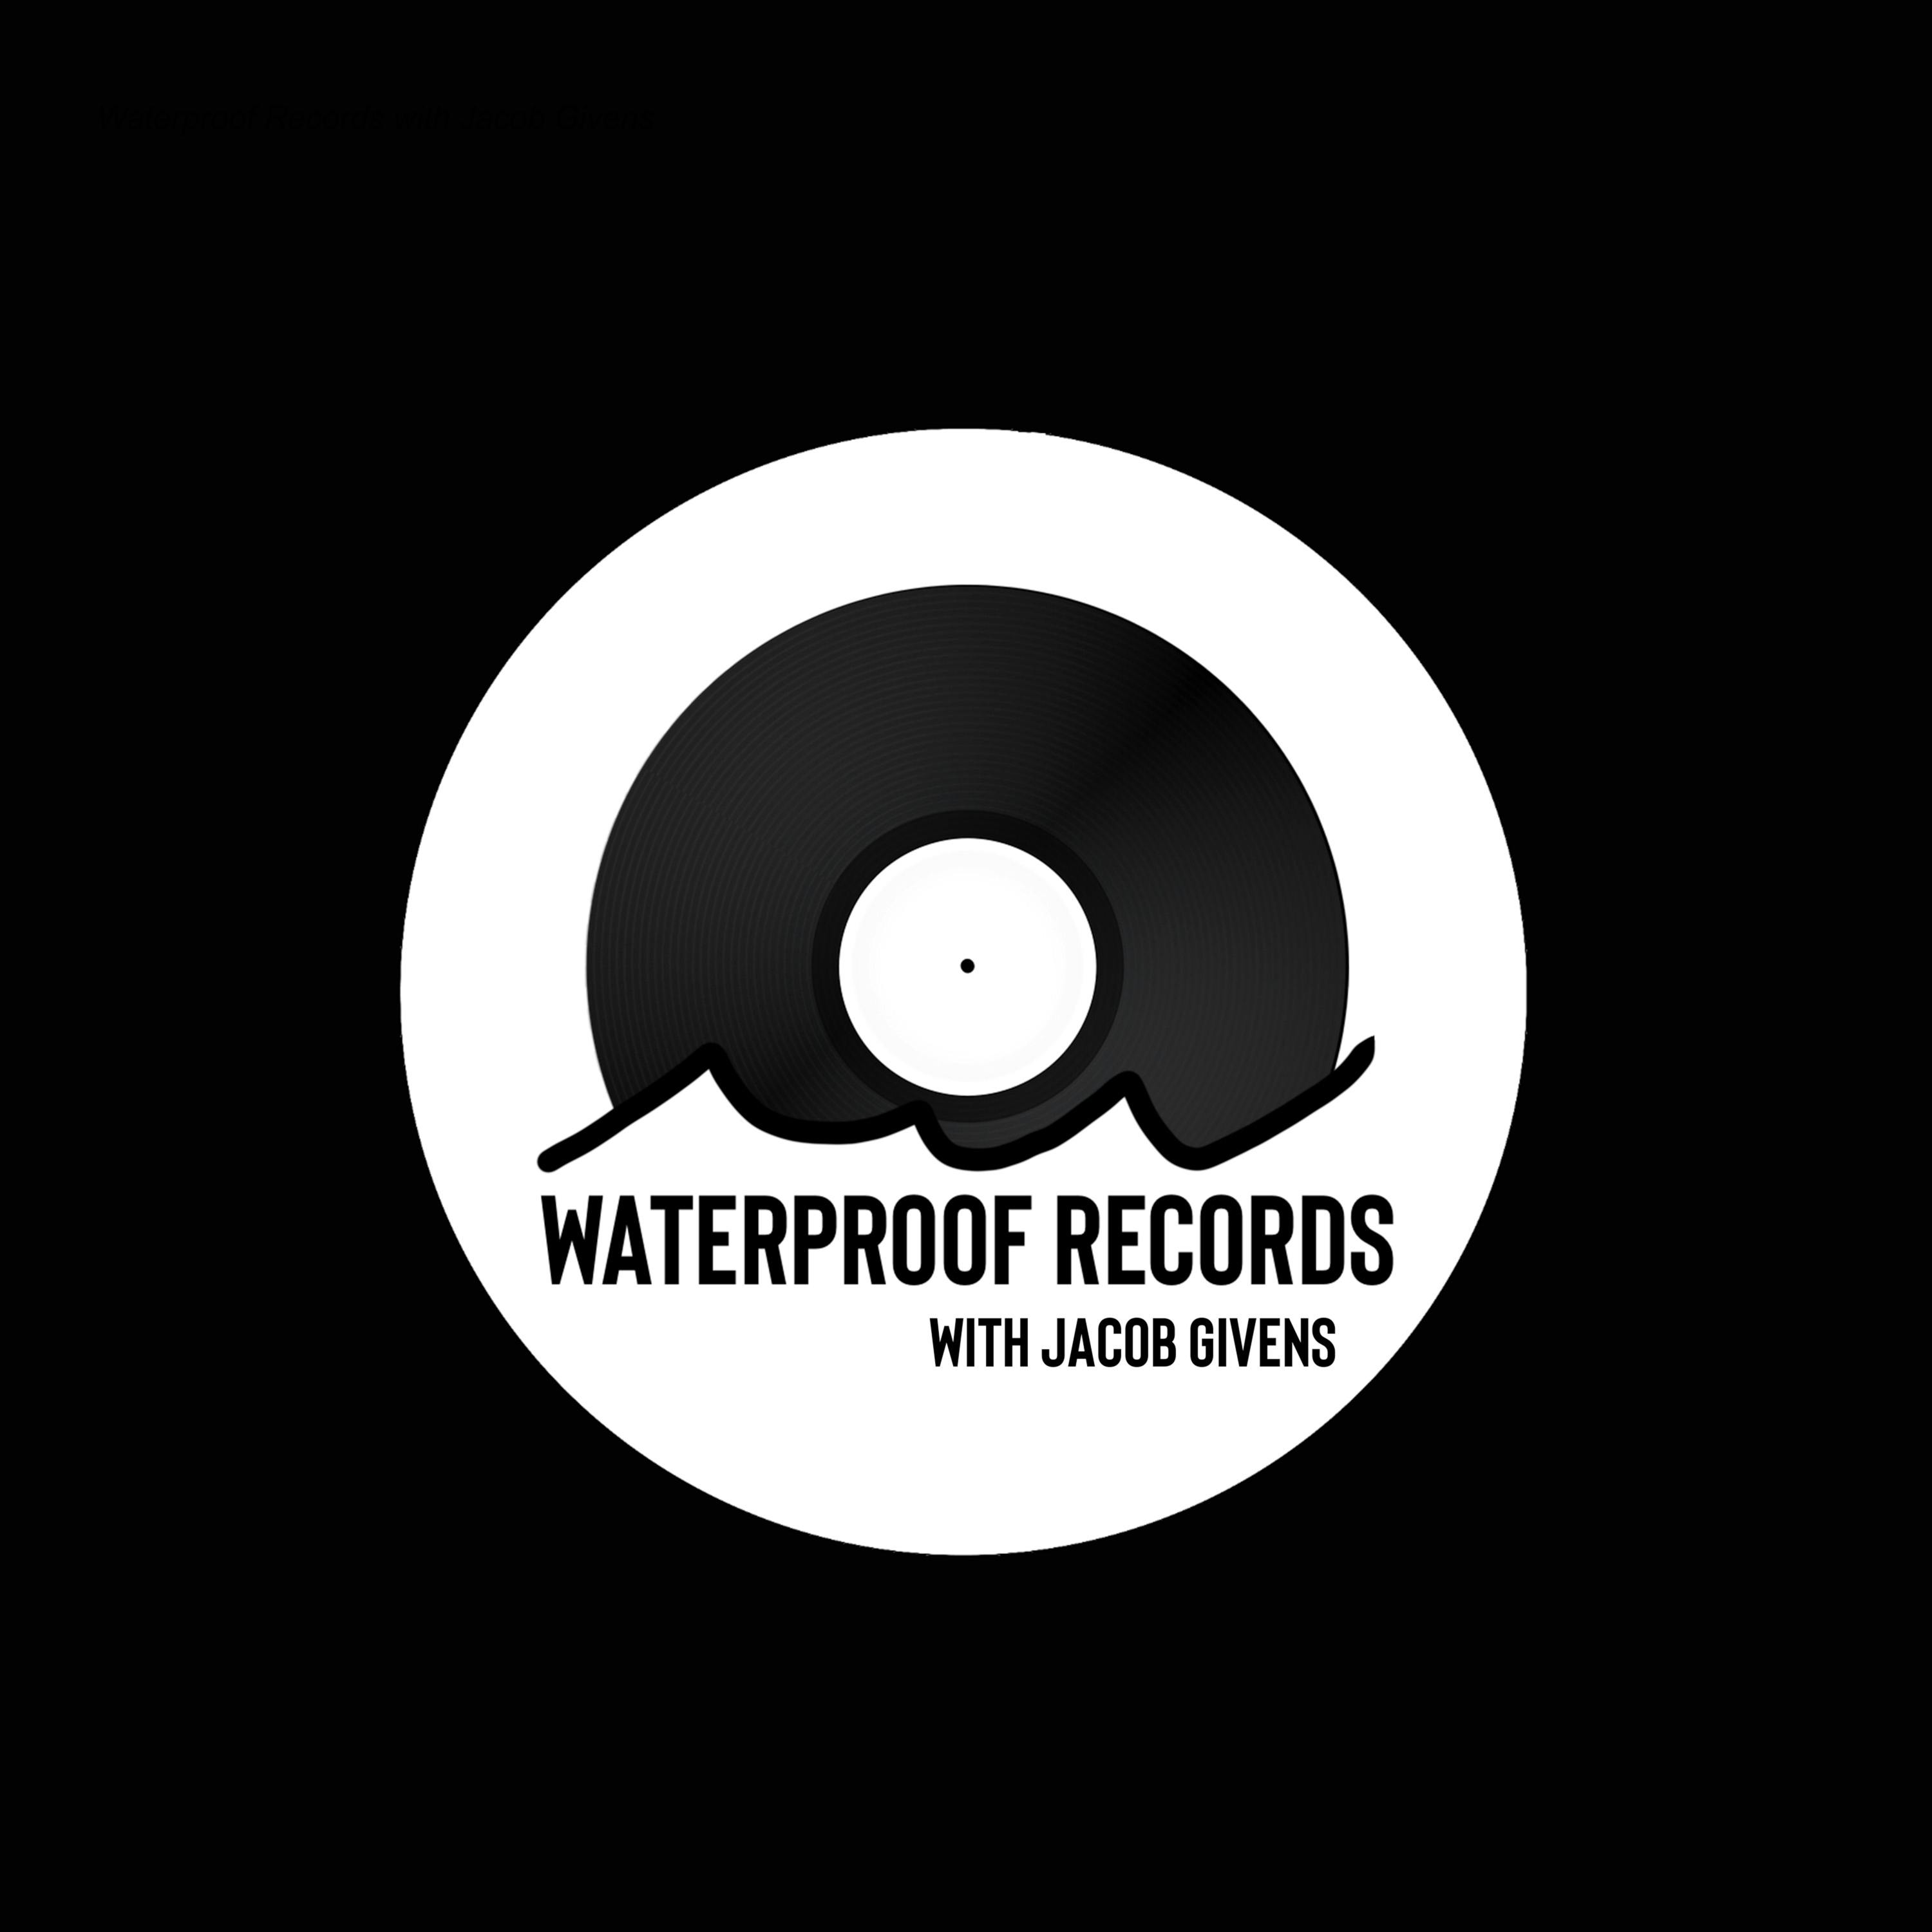 Waterproof Records with Jacob Givens